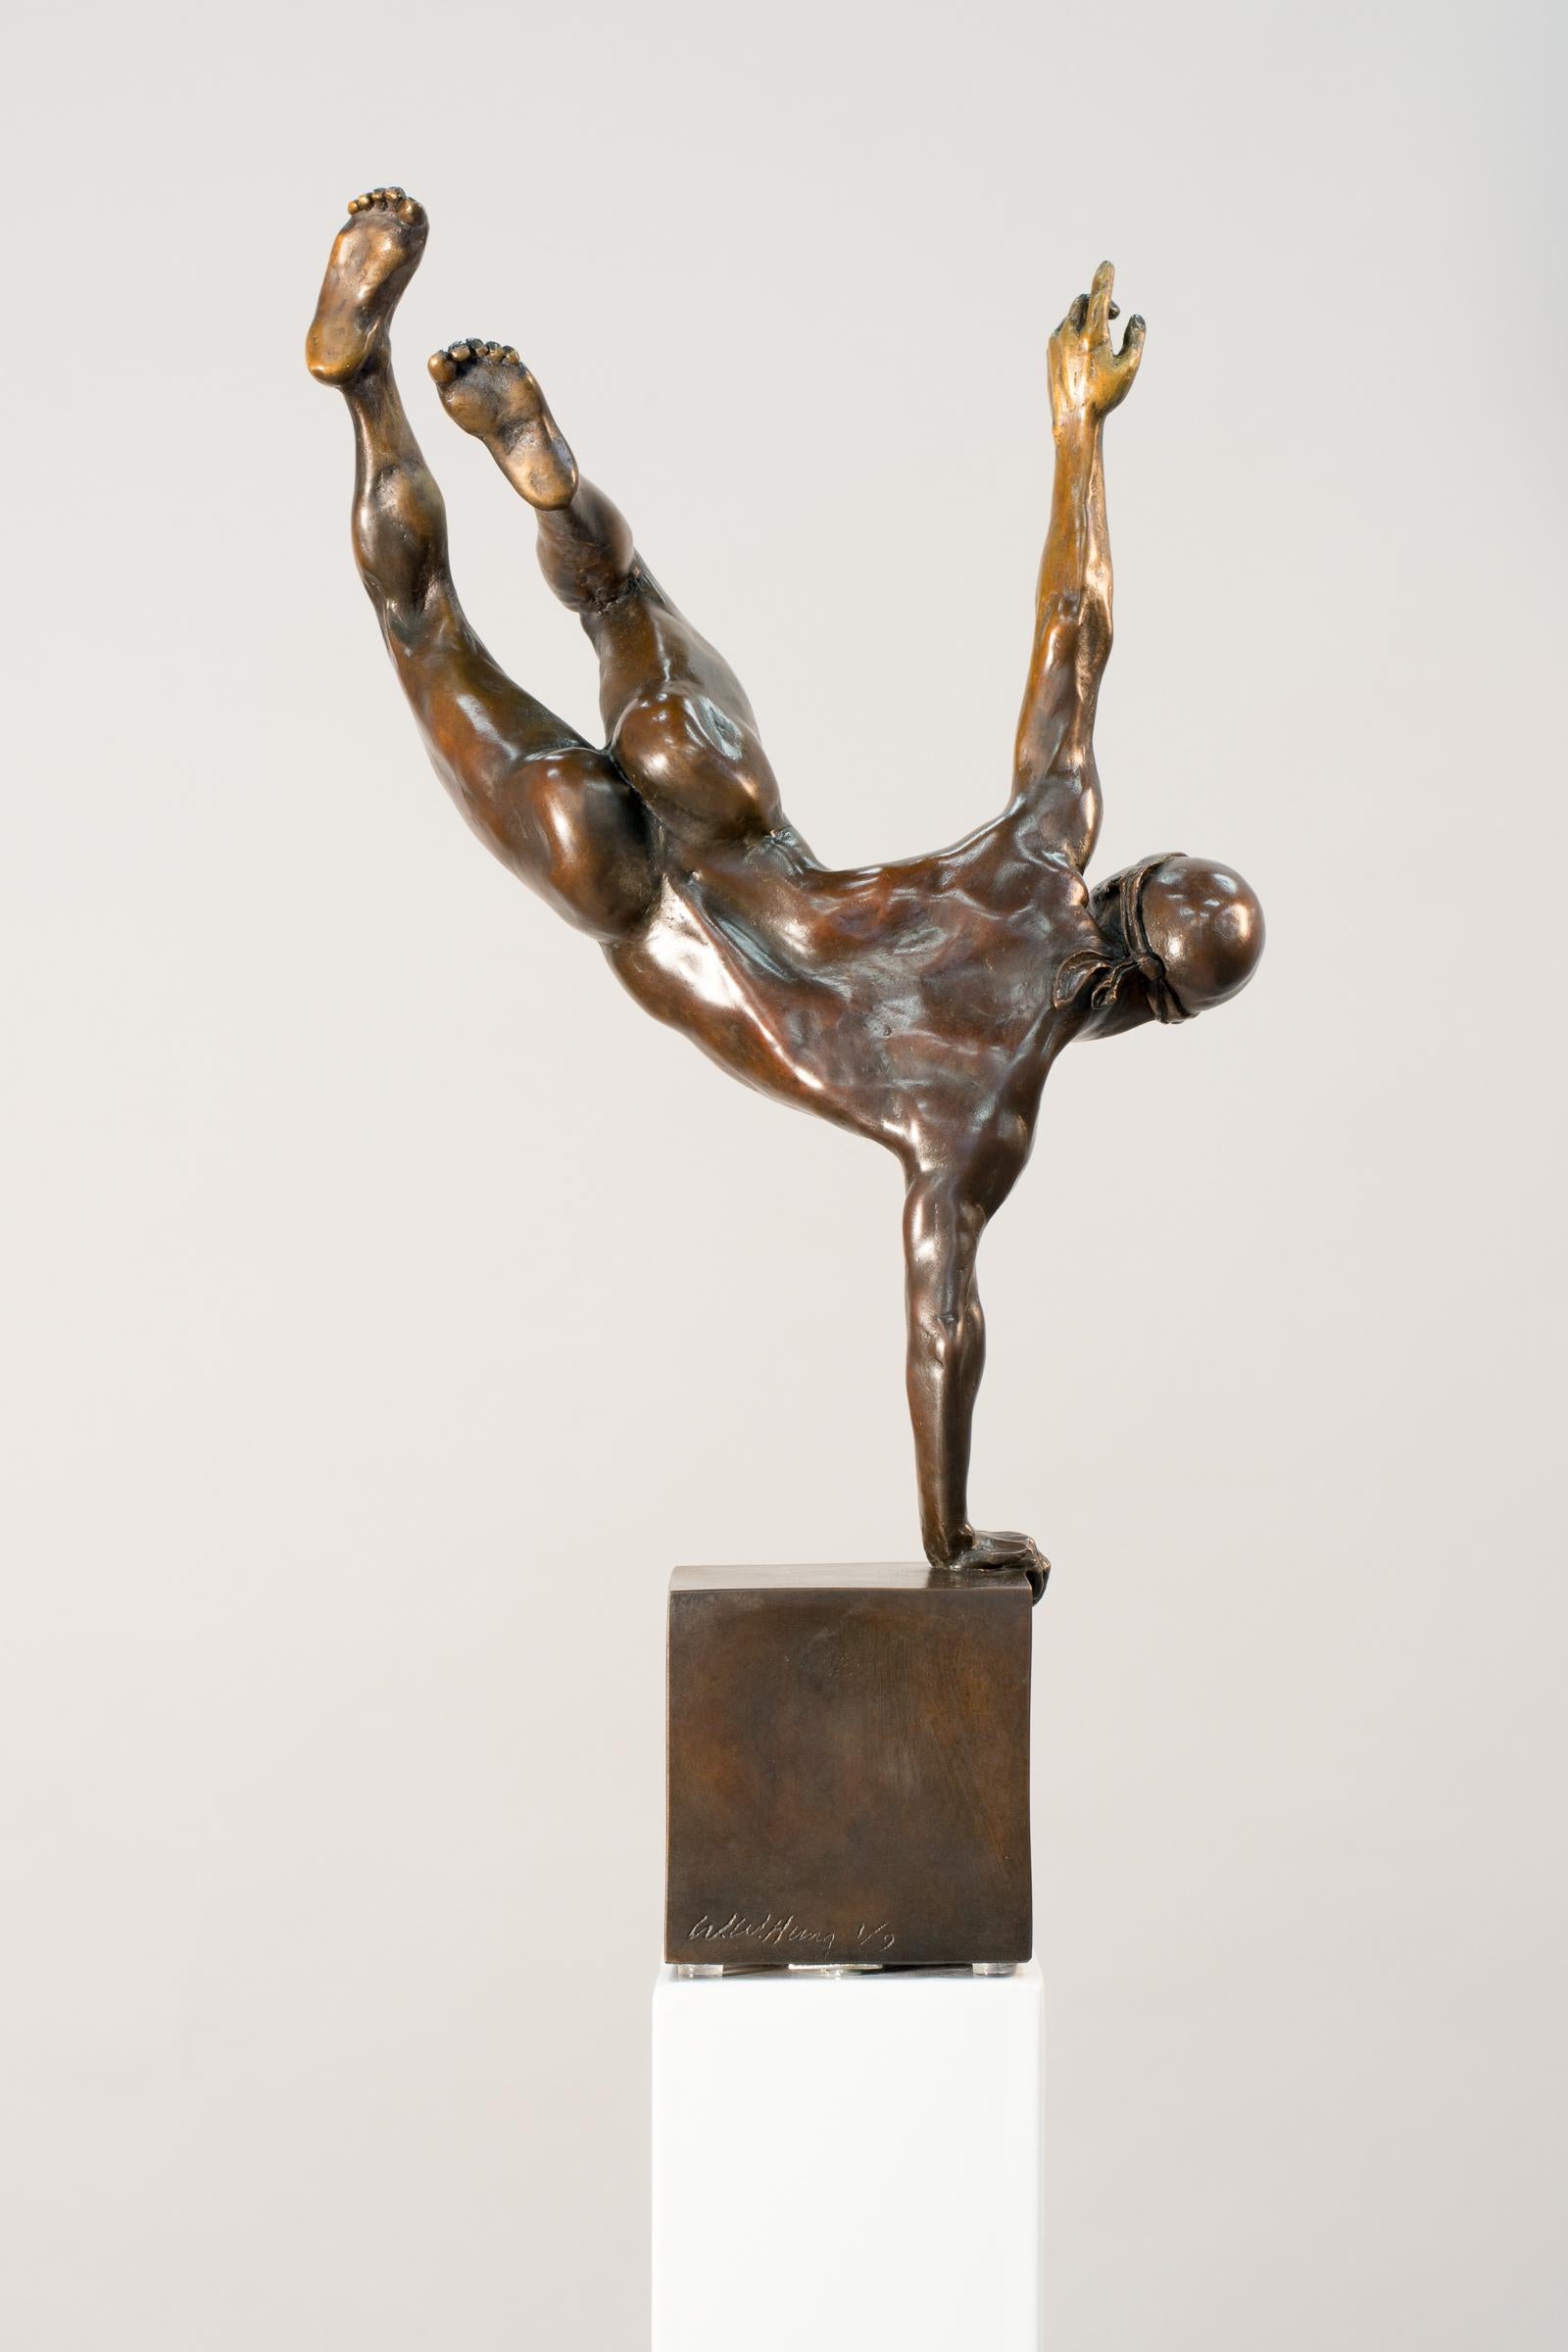 Yearning 2/9 - male, nude, figurative, statuette, bronze sculpture - Contemporary Sculpture by W.W. Hung